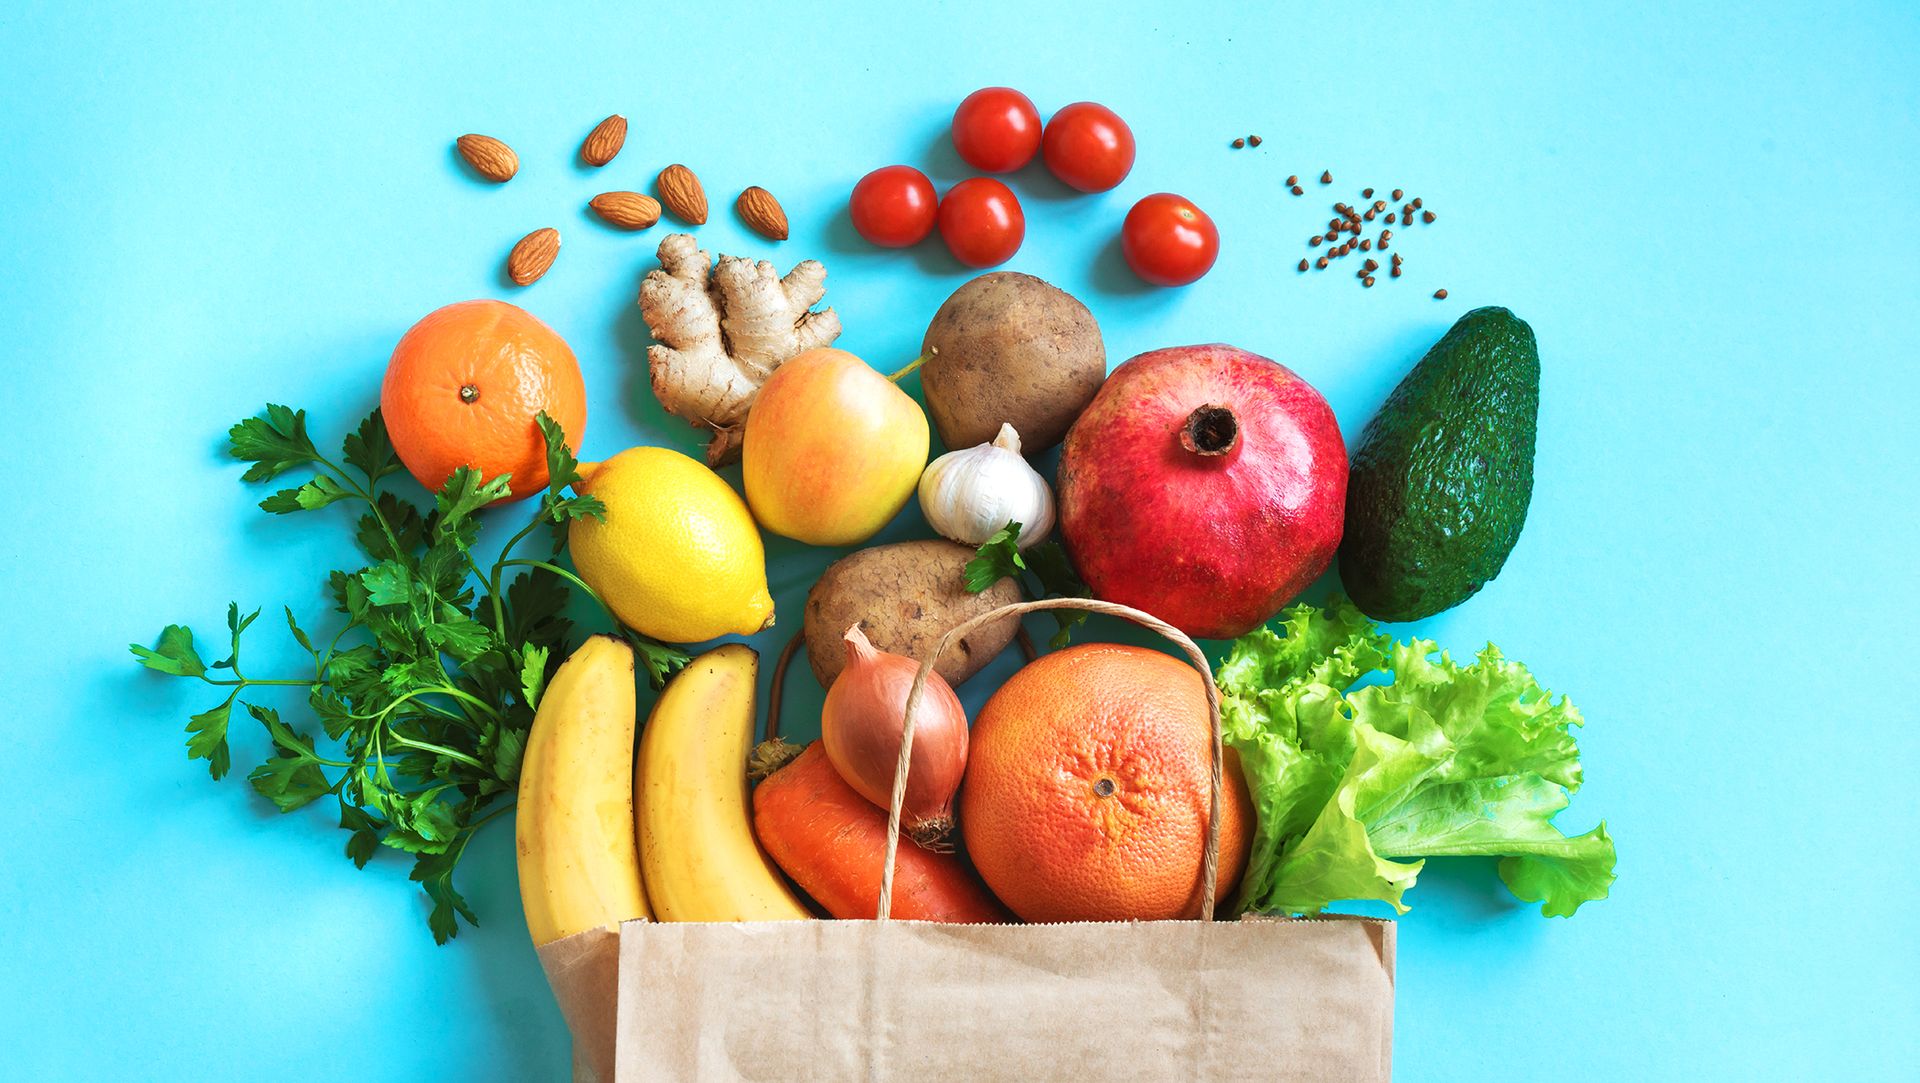 healthy food background healthy vegan vegetarian food in paper bag vegetables and fruits on blue, copy space, banner shopping food supermarket and clean vegan eating concept